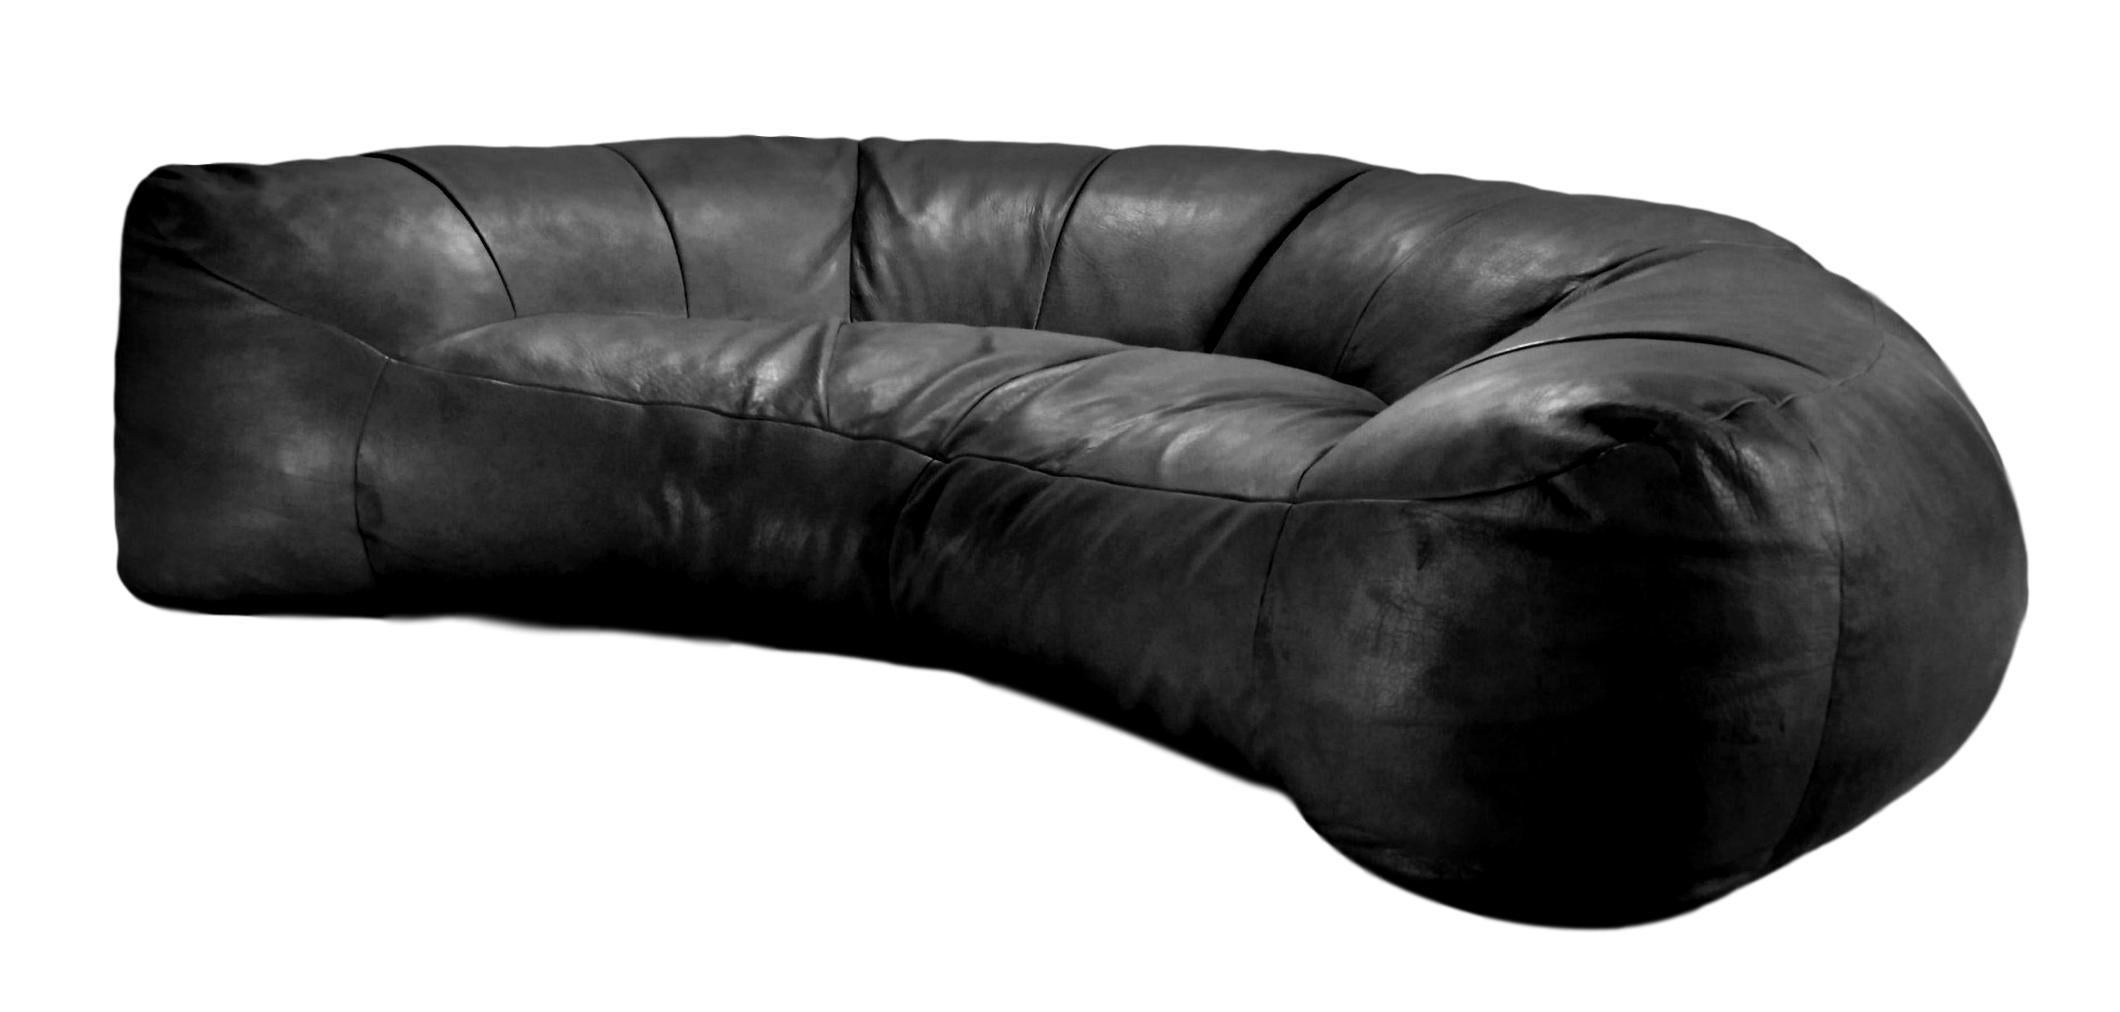 Stunning leather sofa by Raphael Raffel for Honore, Paris. Made to order back in the 1970s and seldom available for purchase. Black leather sofa in the shape of a giant croissant. Good vintage condition.